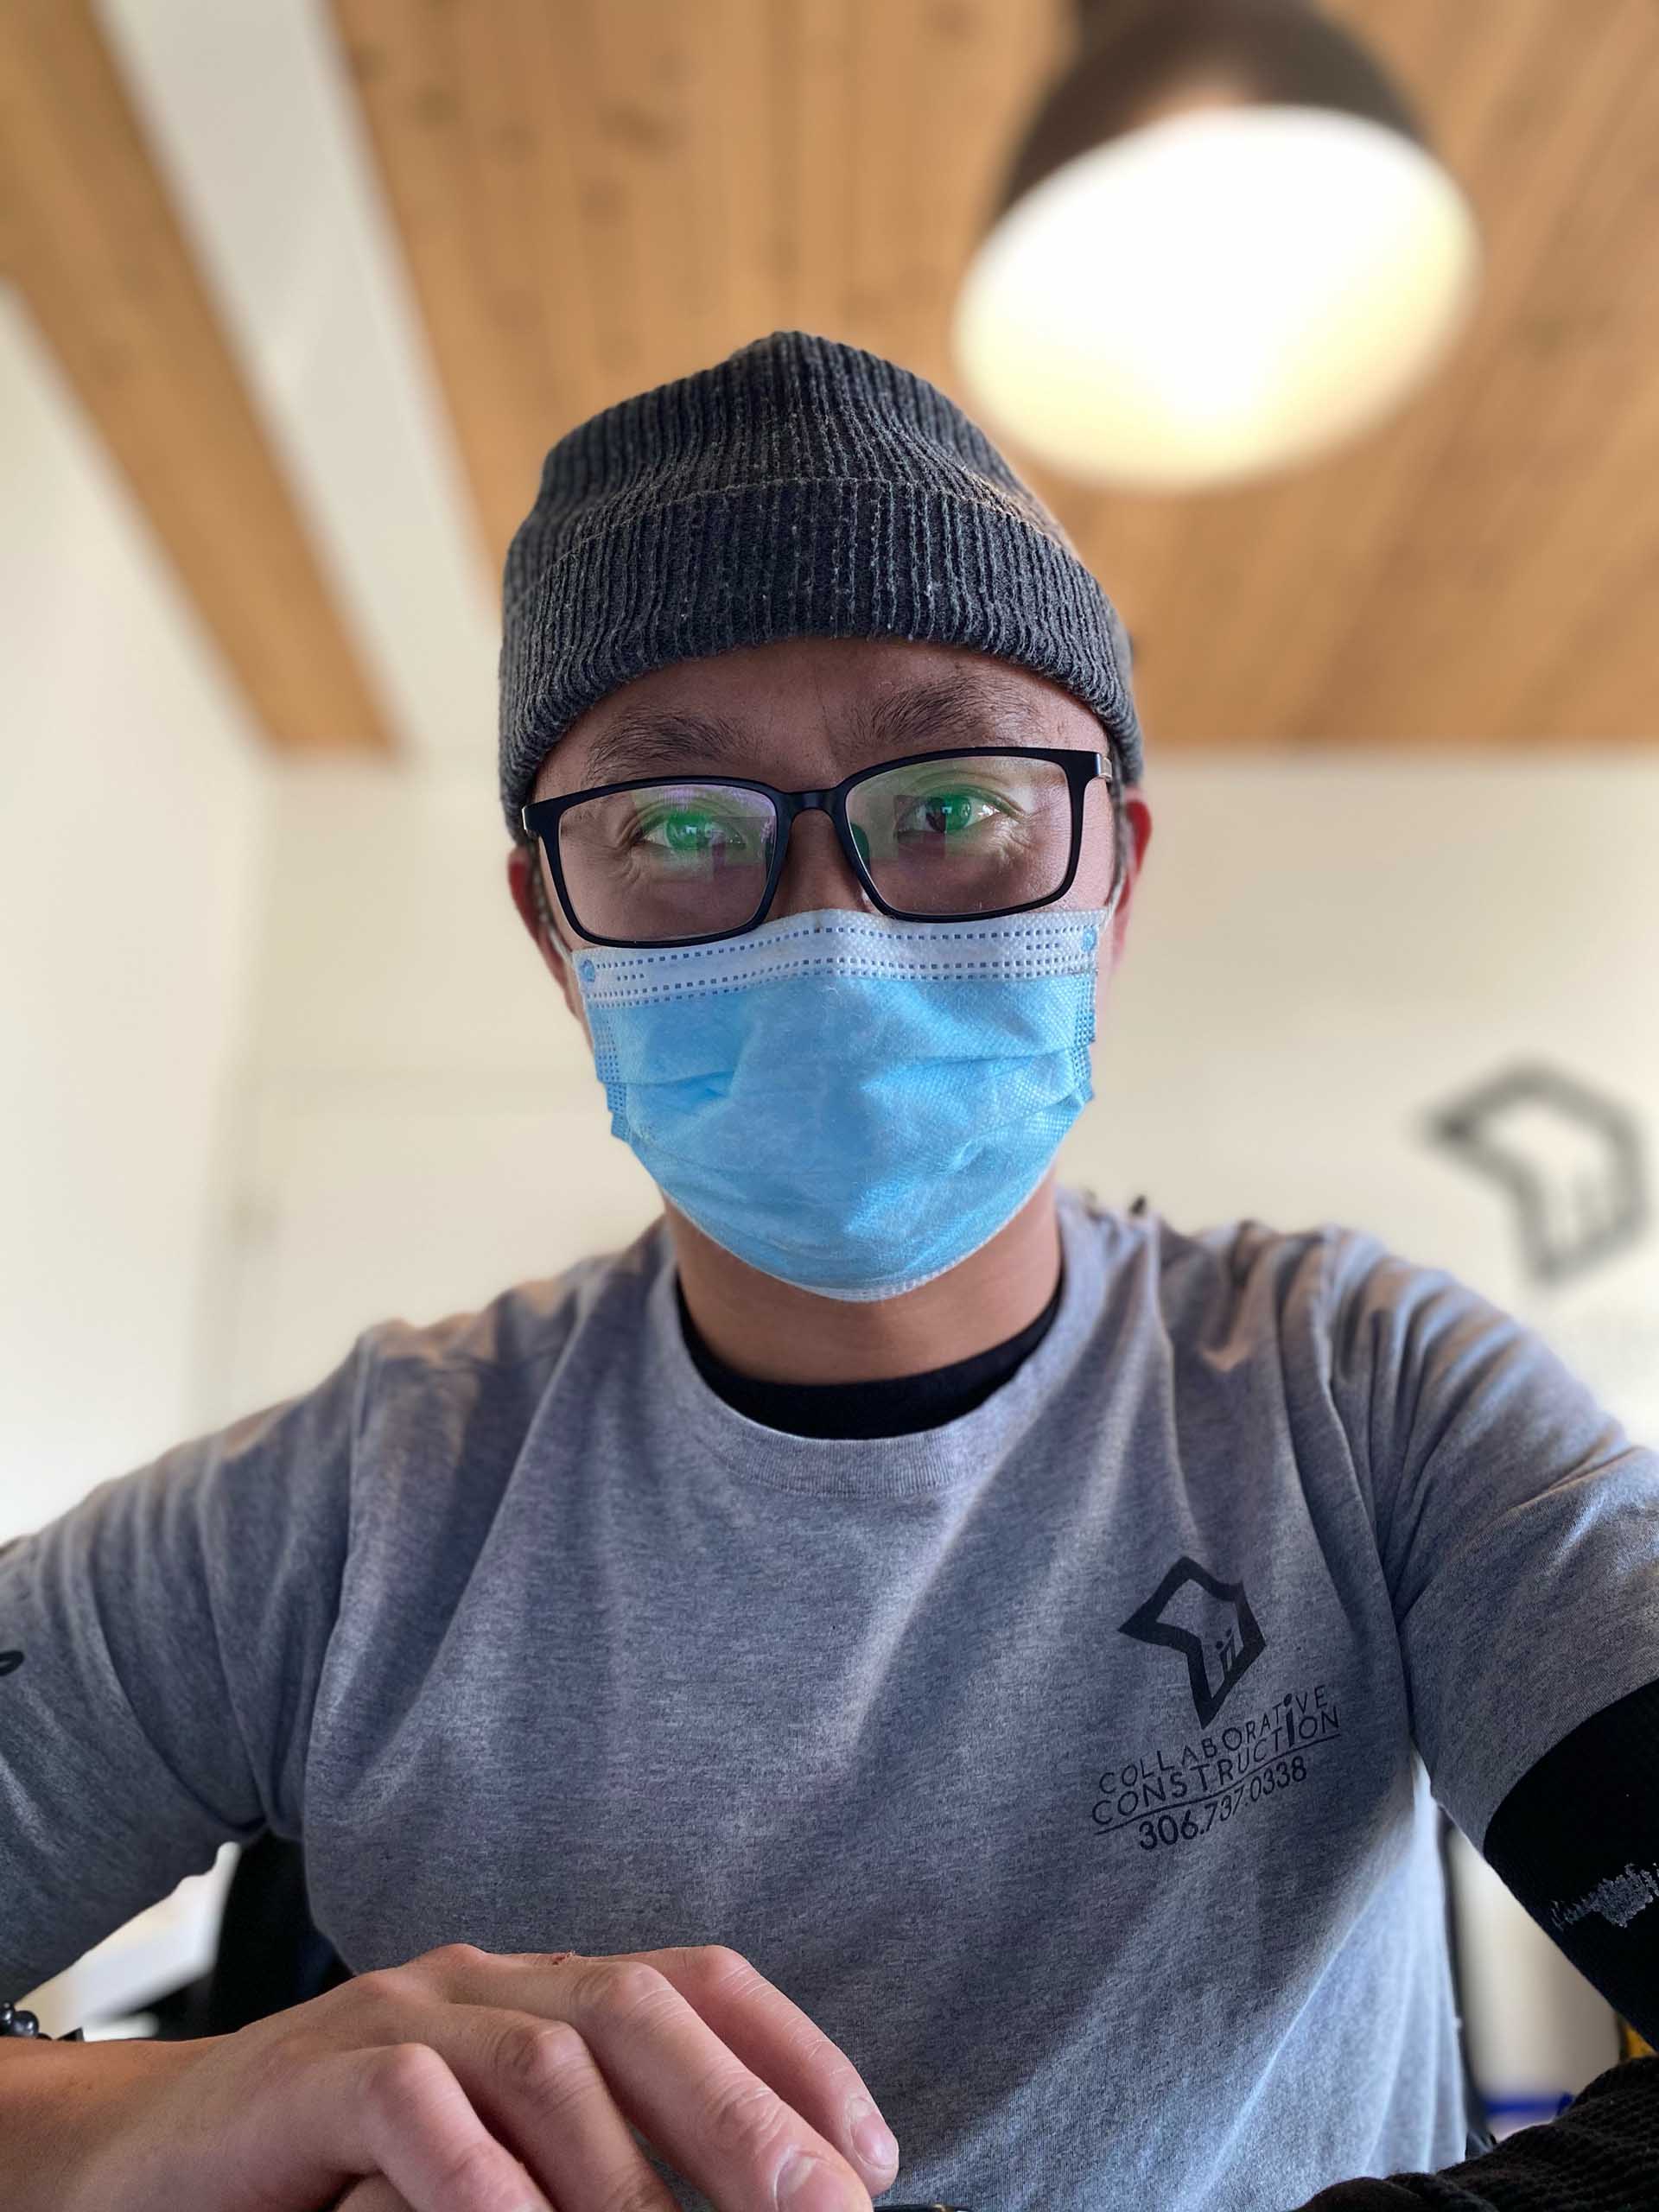 collaborative construction owner follows covid-19 guidelines by wearing mask